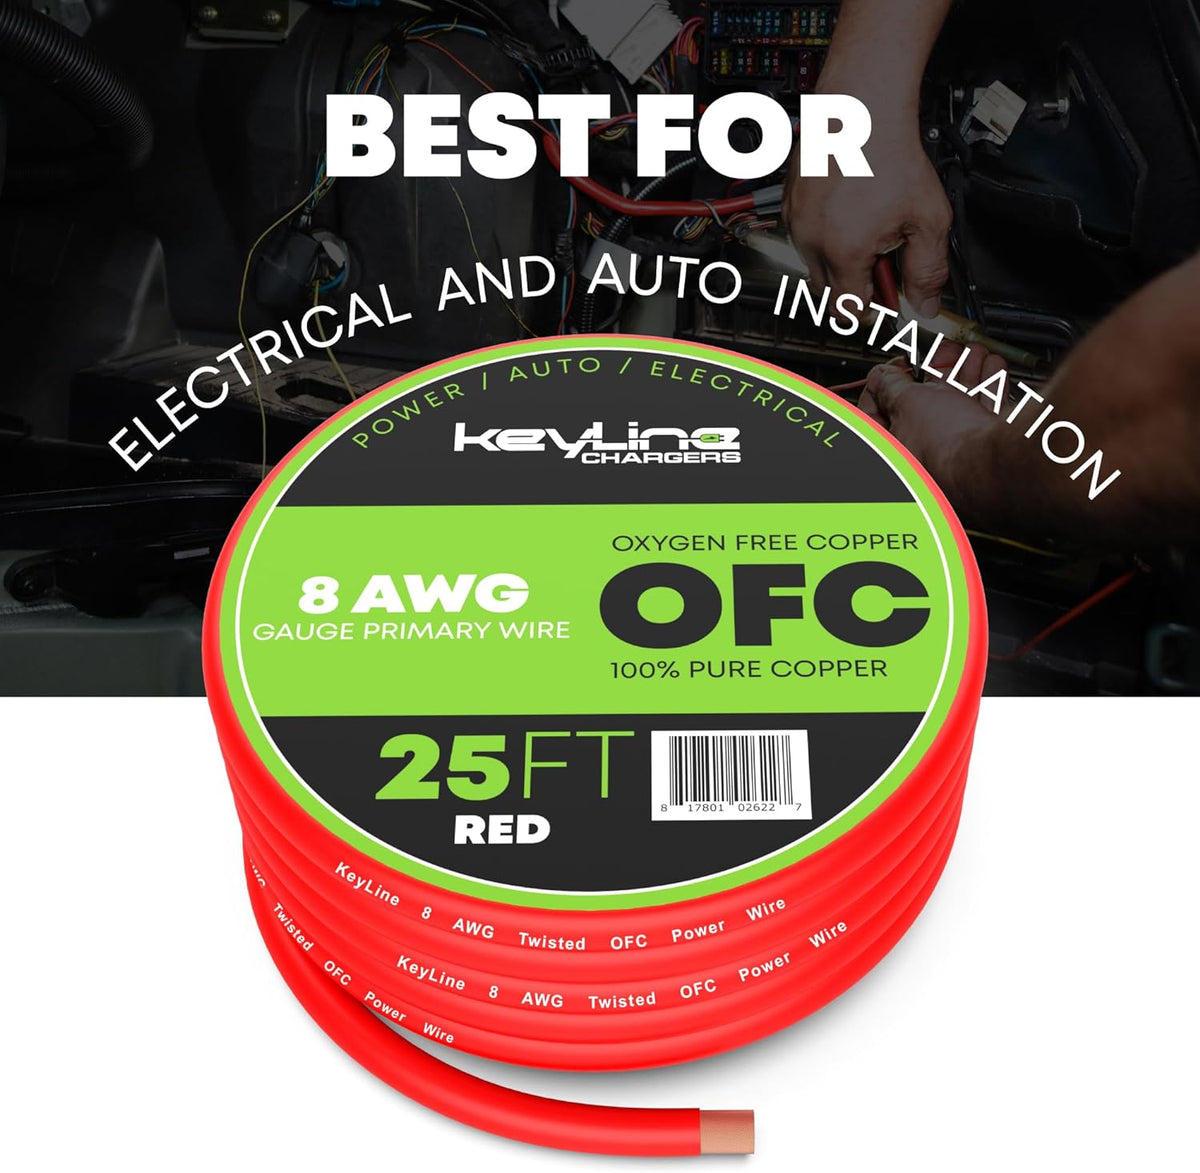 8 Gauge Wire - 25ft Red | 8 Gauge Amp Wire, Battery Cable, Marine Speaker Wire, Solar Cables for RV Trailer, Car Audio Speaker Cable, 8 AWG Automotive Wire Oxygen Free Copper (OFC)